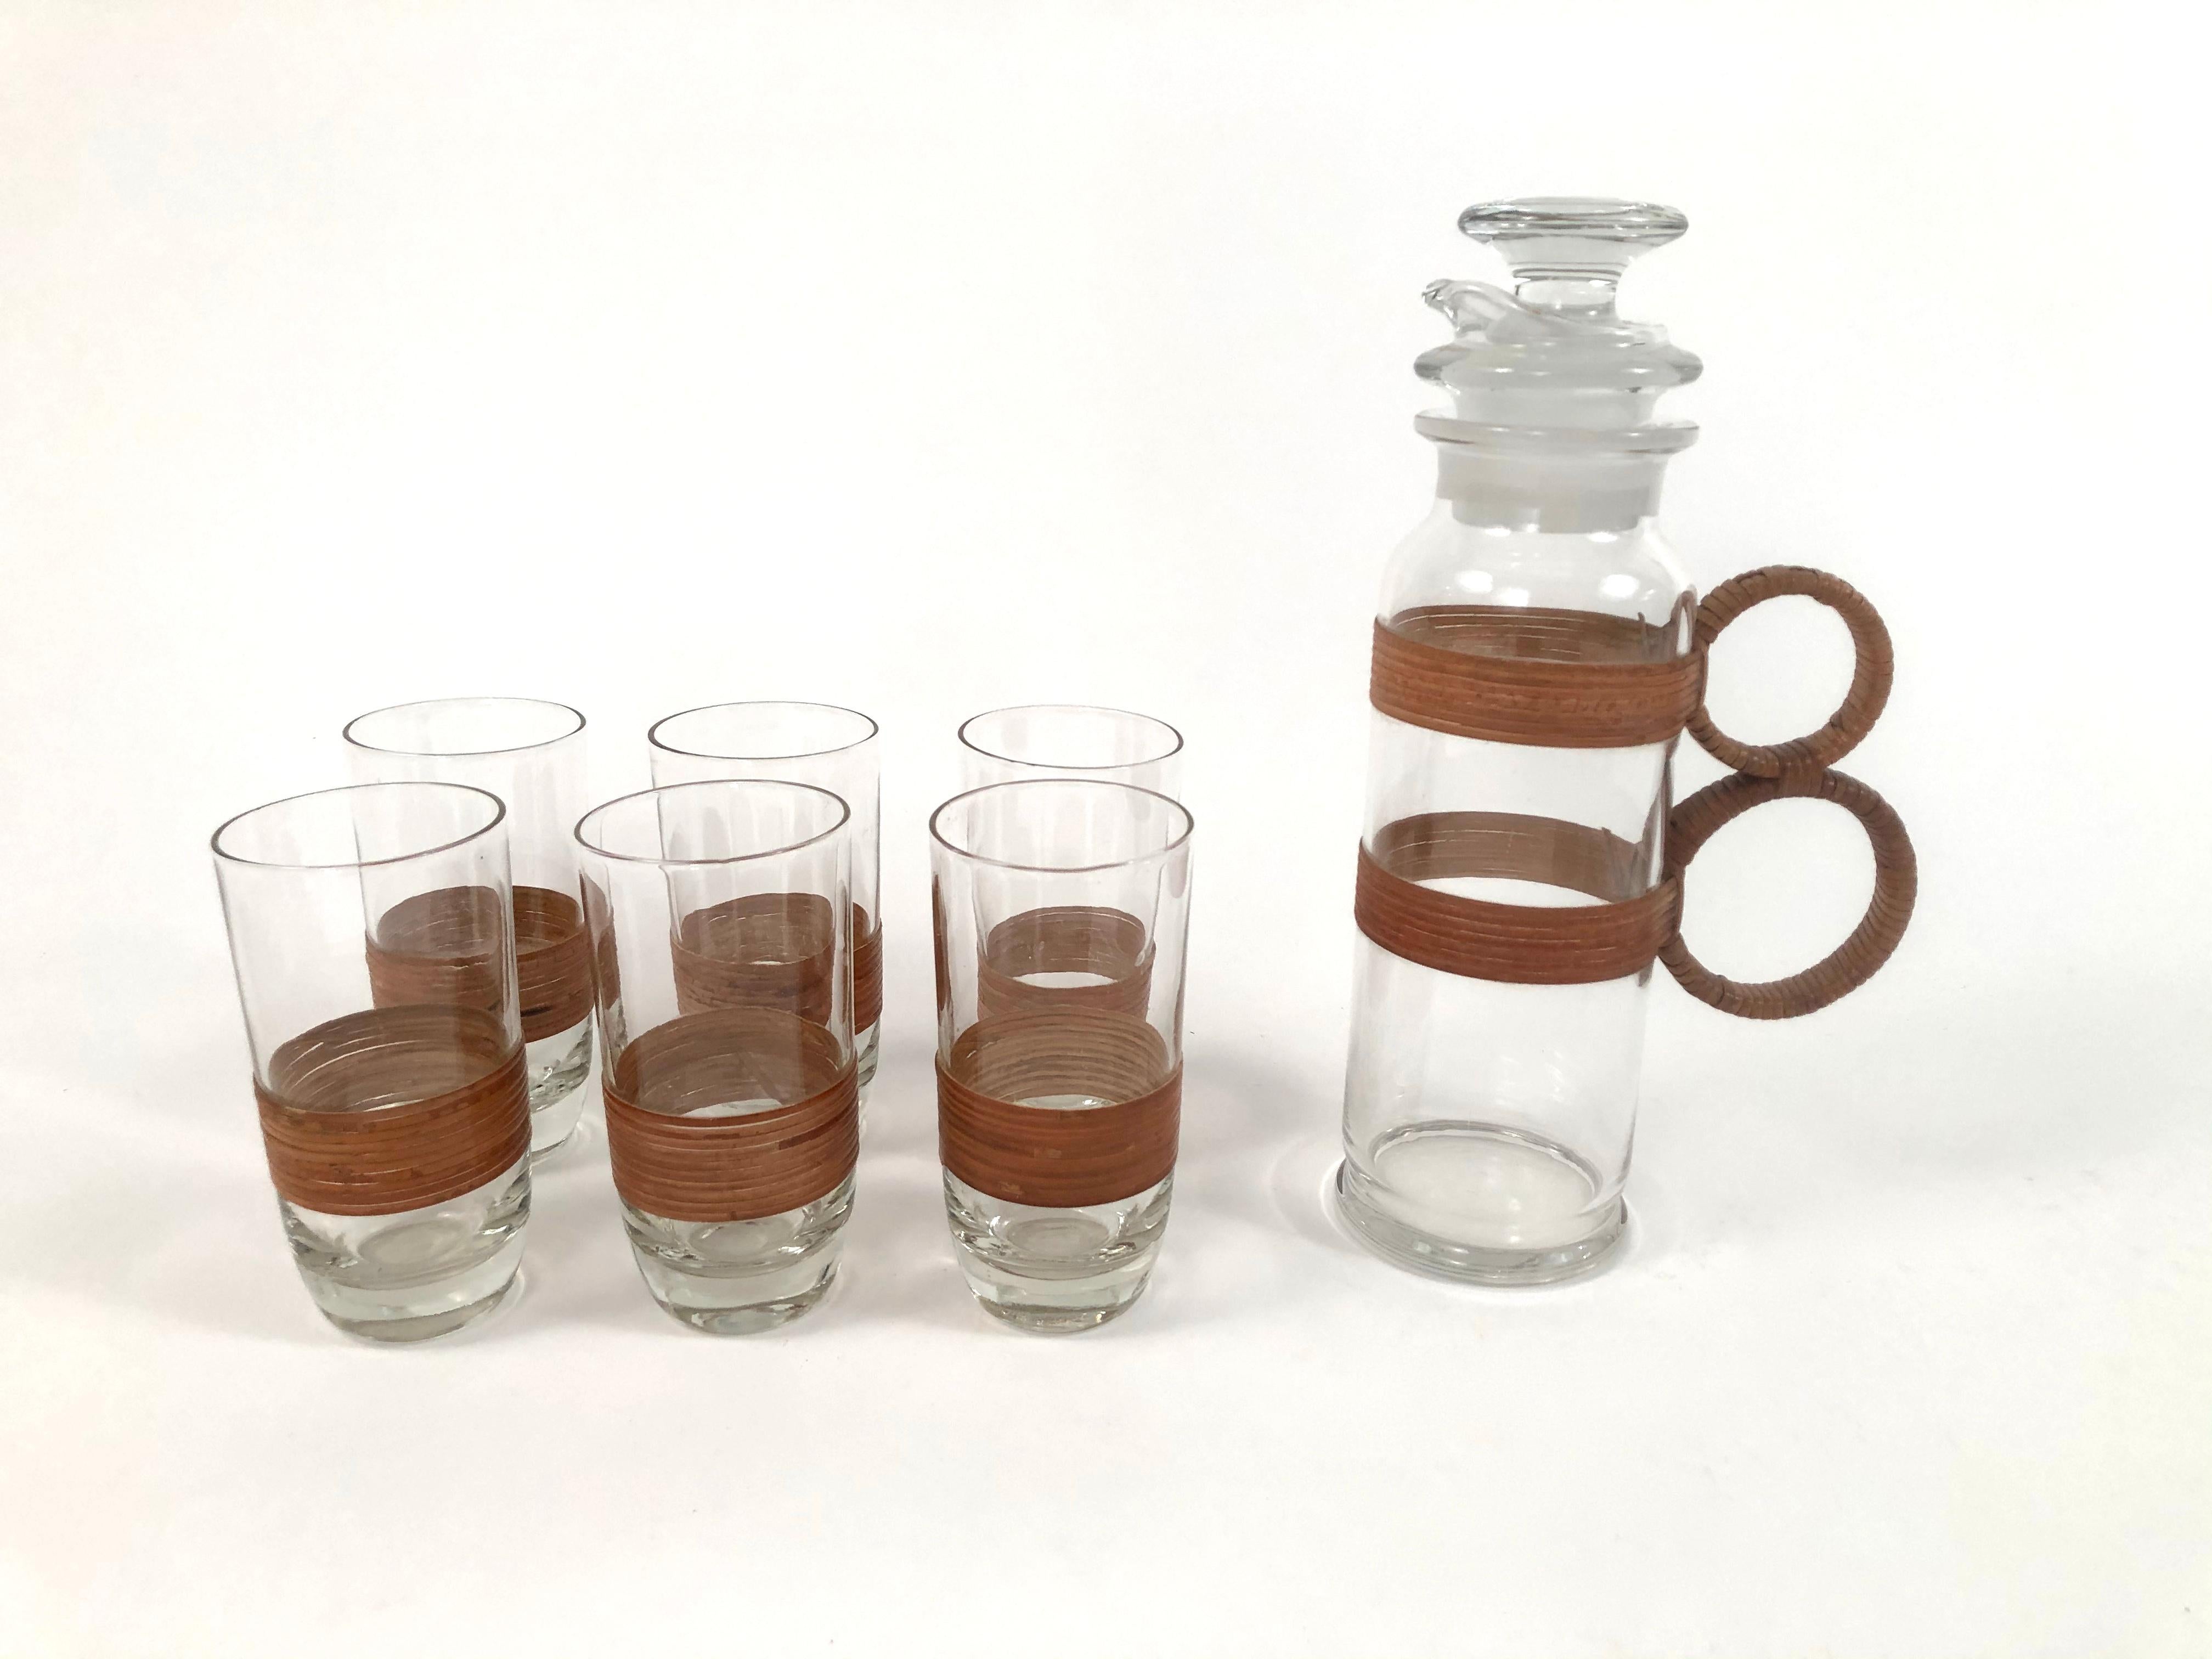 A stylish and beautifully made vintage highball set (also perfect for other cocktails, iced tea or lemonade) consisting of a rattan wrapped glass pitcher, complete with glass strainer and stopper, with a sturdy and comfortable to hold double circle